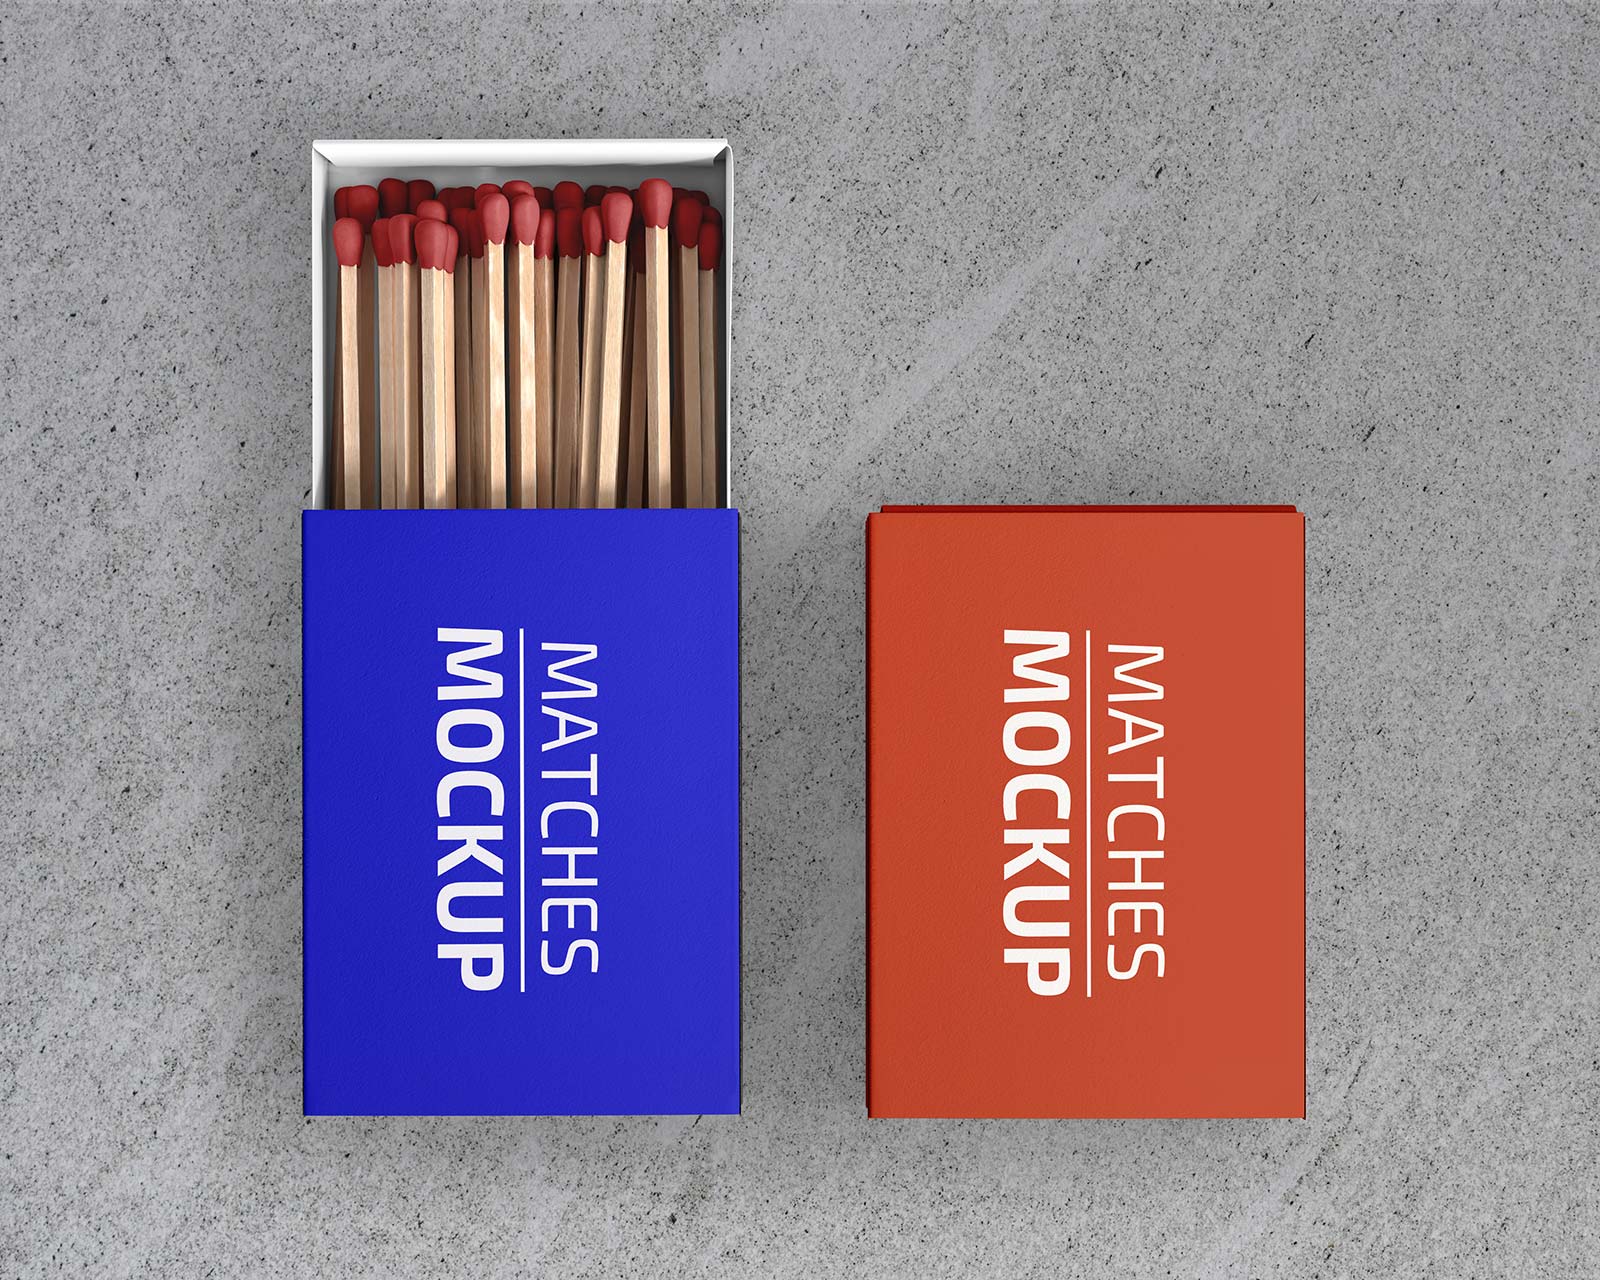 Free Matchbox & Matches Packaging Mockup PSD